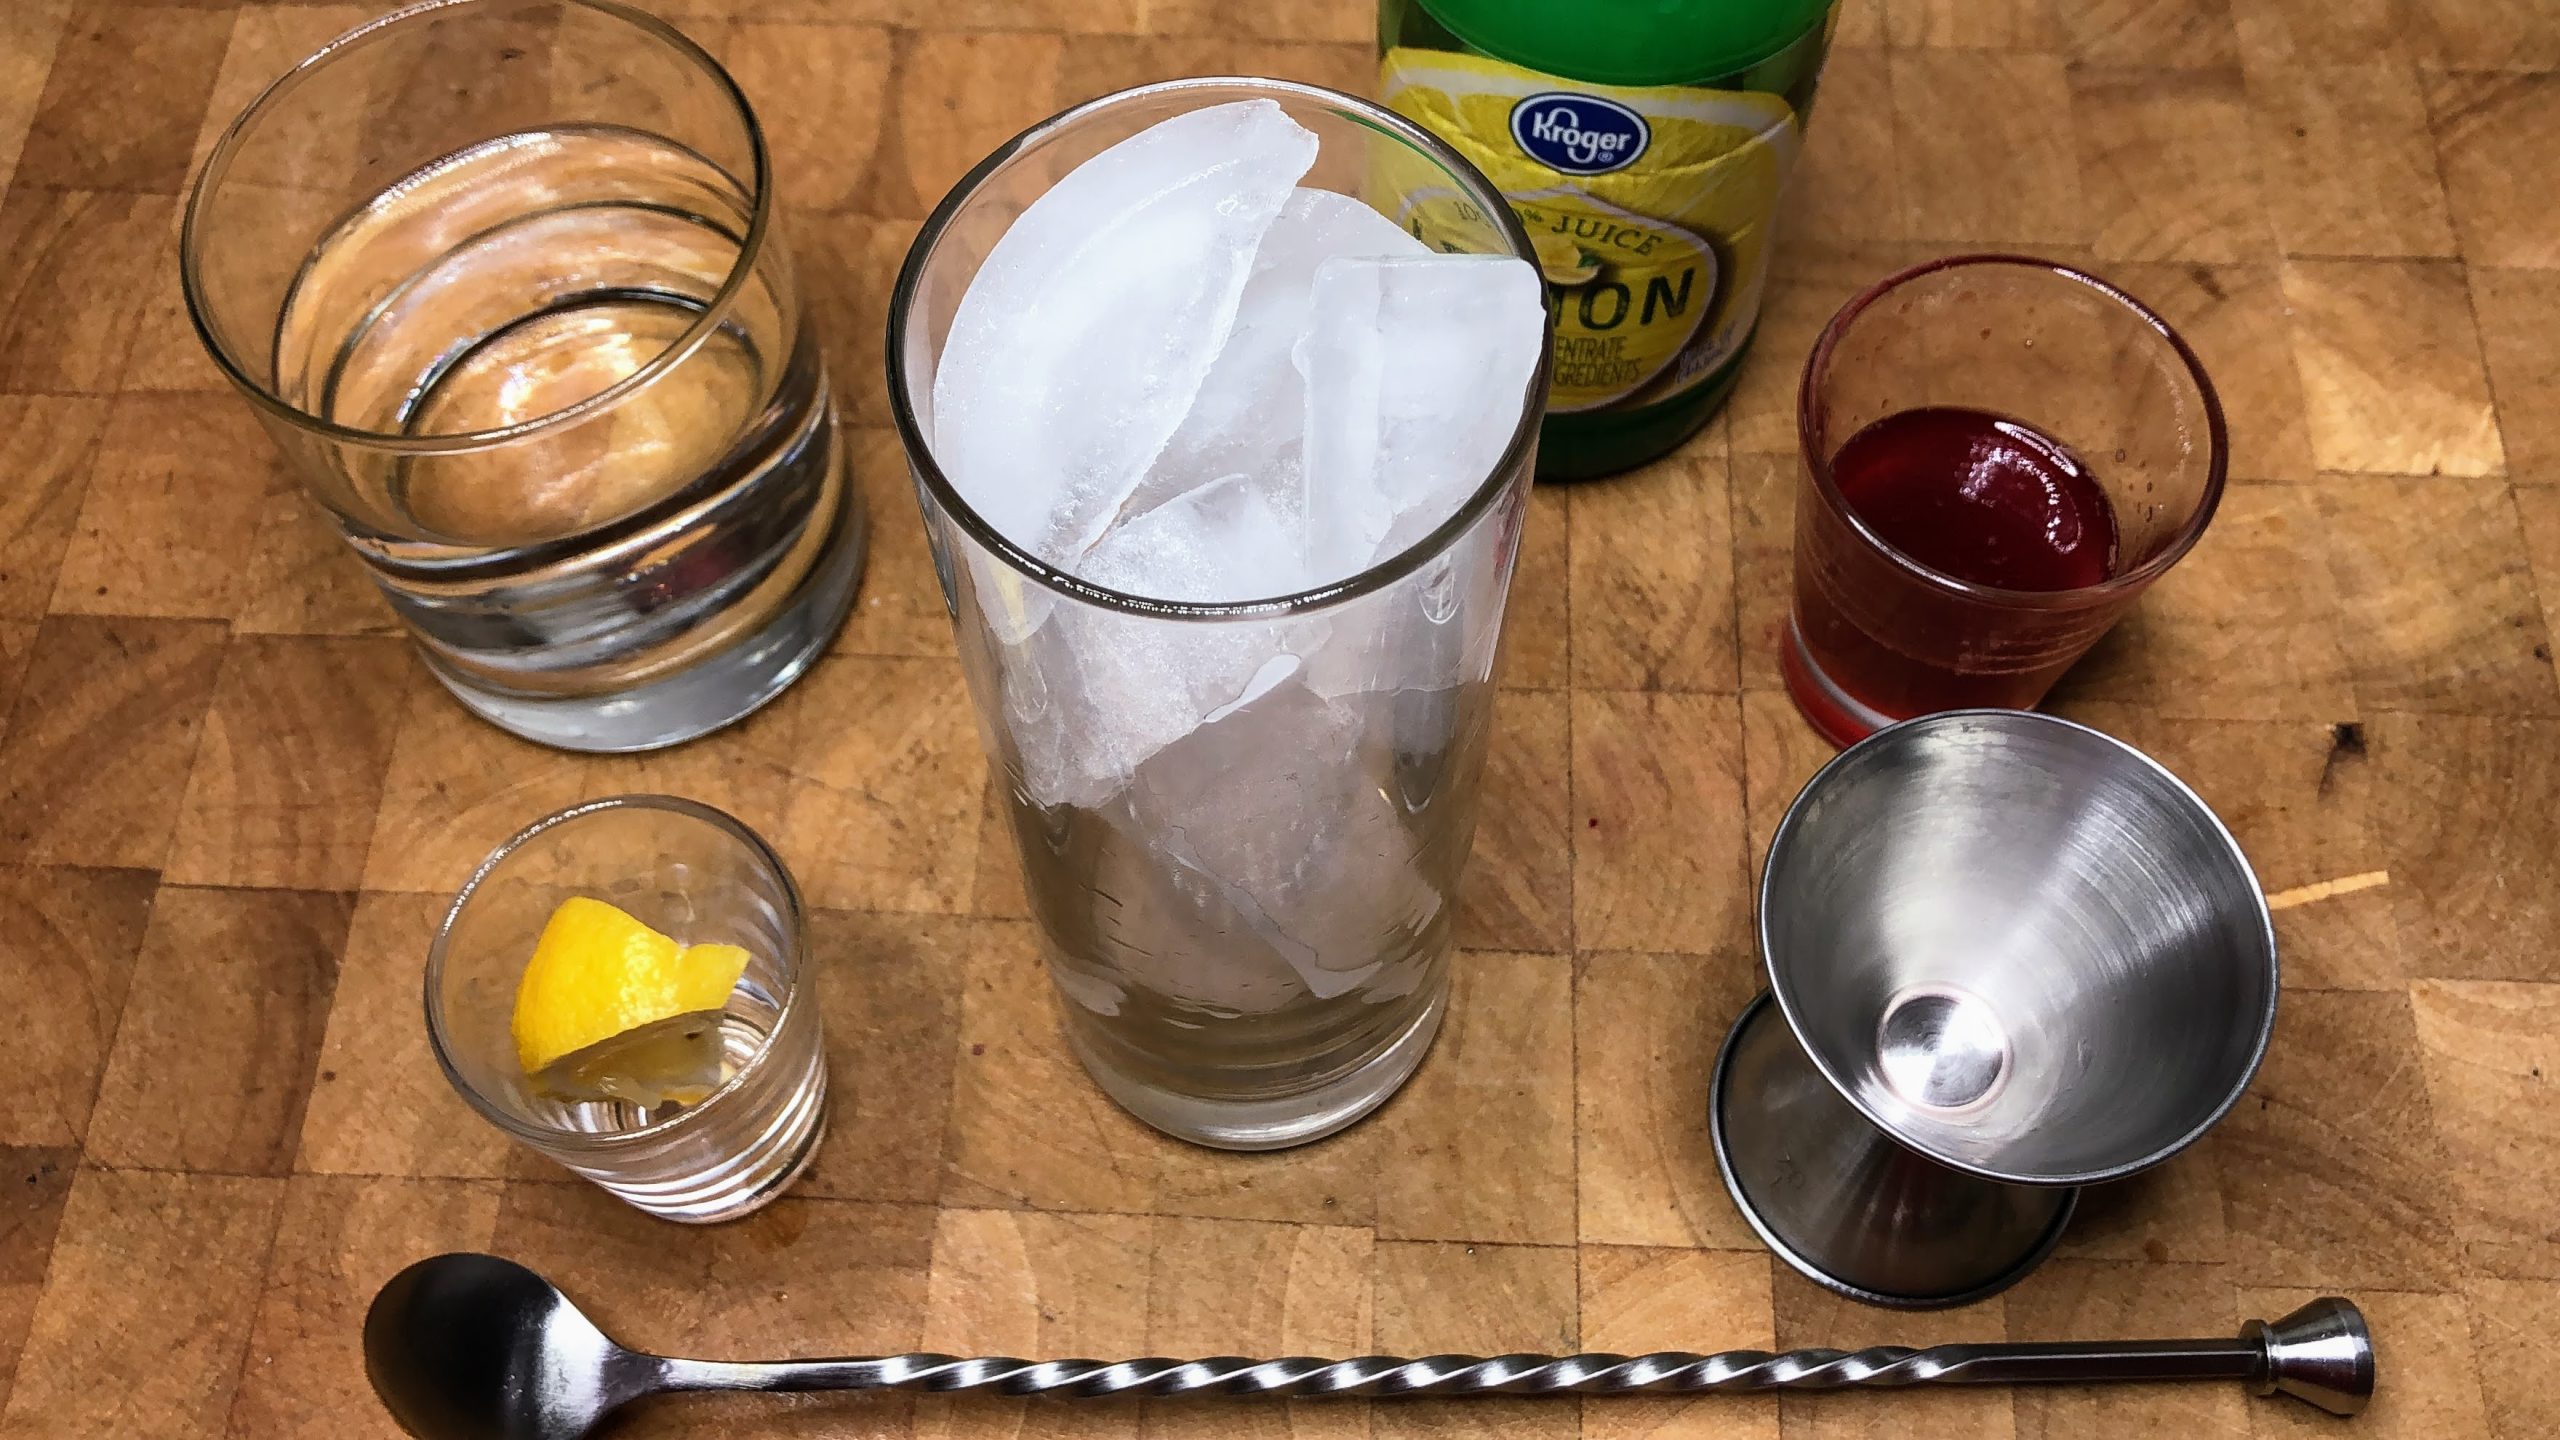 Highball glass with ice next to water, jigger, lemon juice, strawberry simple syrup and a bar spoon.